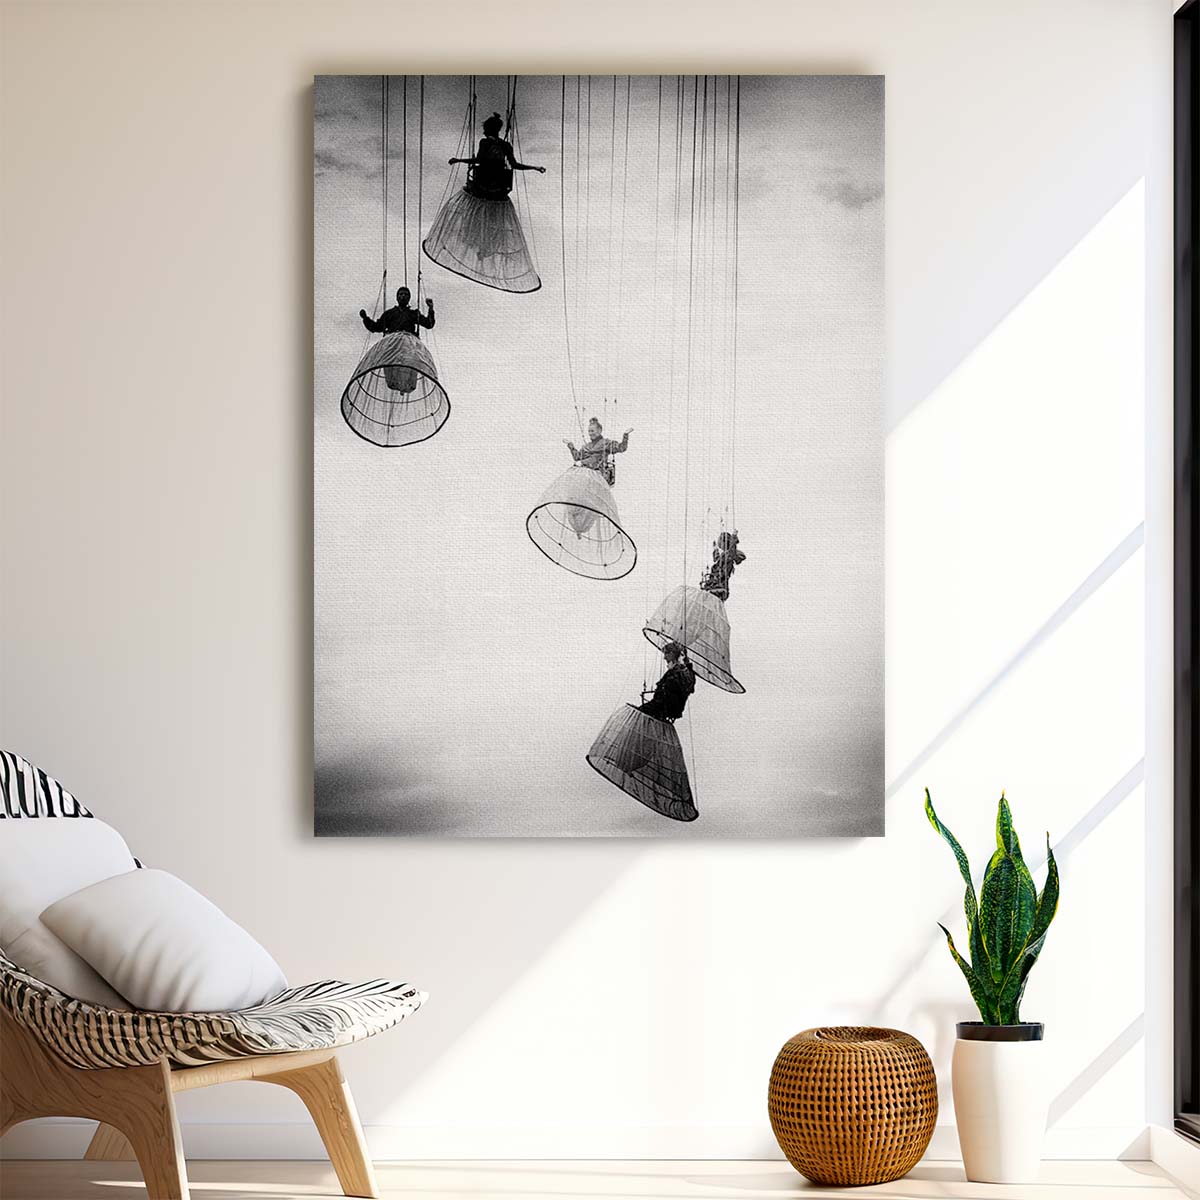 Romanian Summer Theatre Festival BW Vintage Angels Photography Wall Art by Luxuriance Designs, made in USA